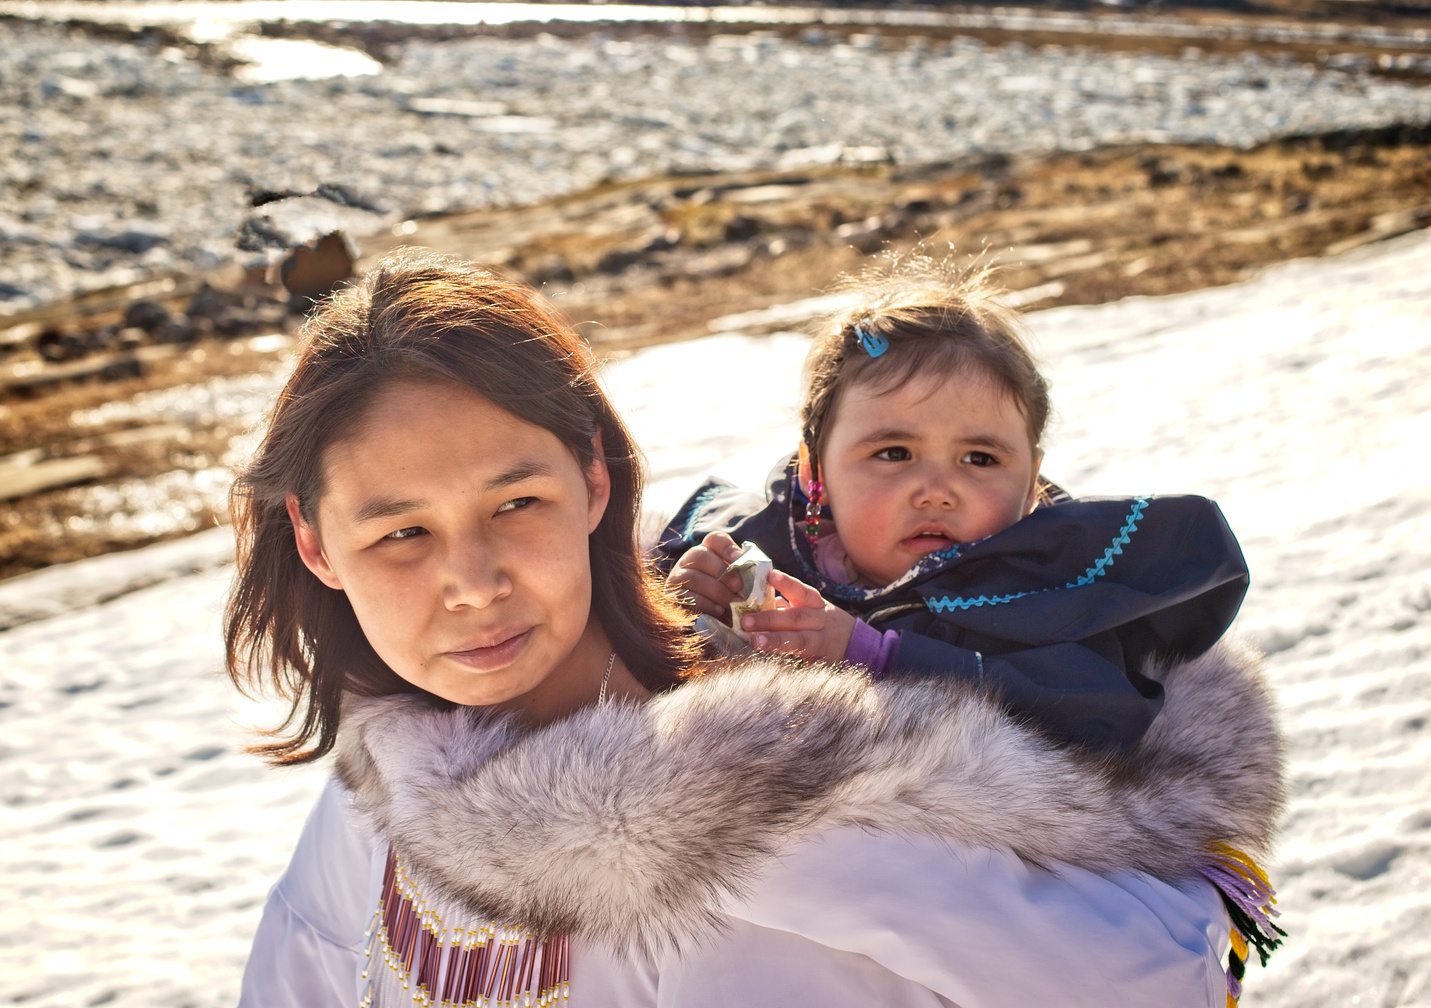 Inuit mother and daughter on Baffin Island, Nunavut, Canada.